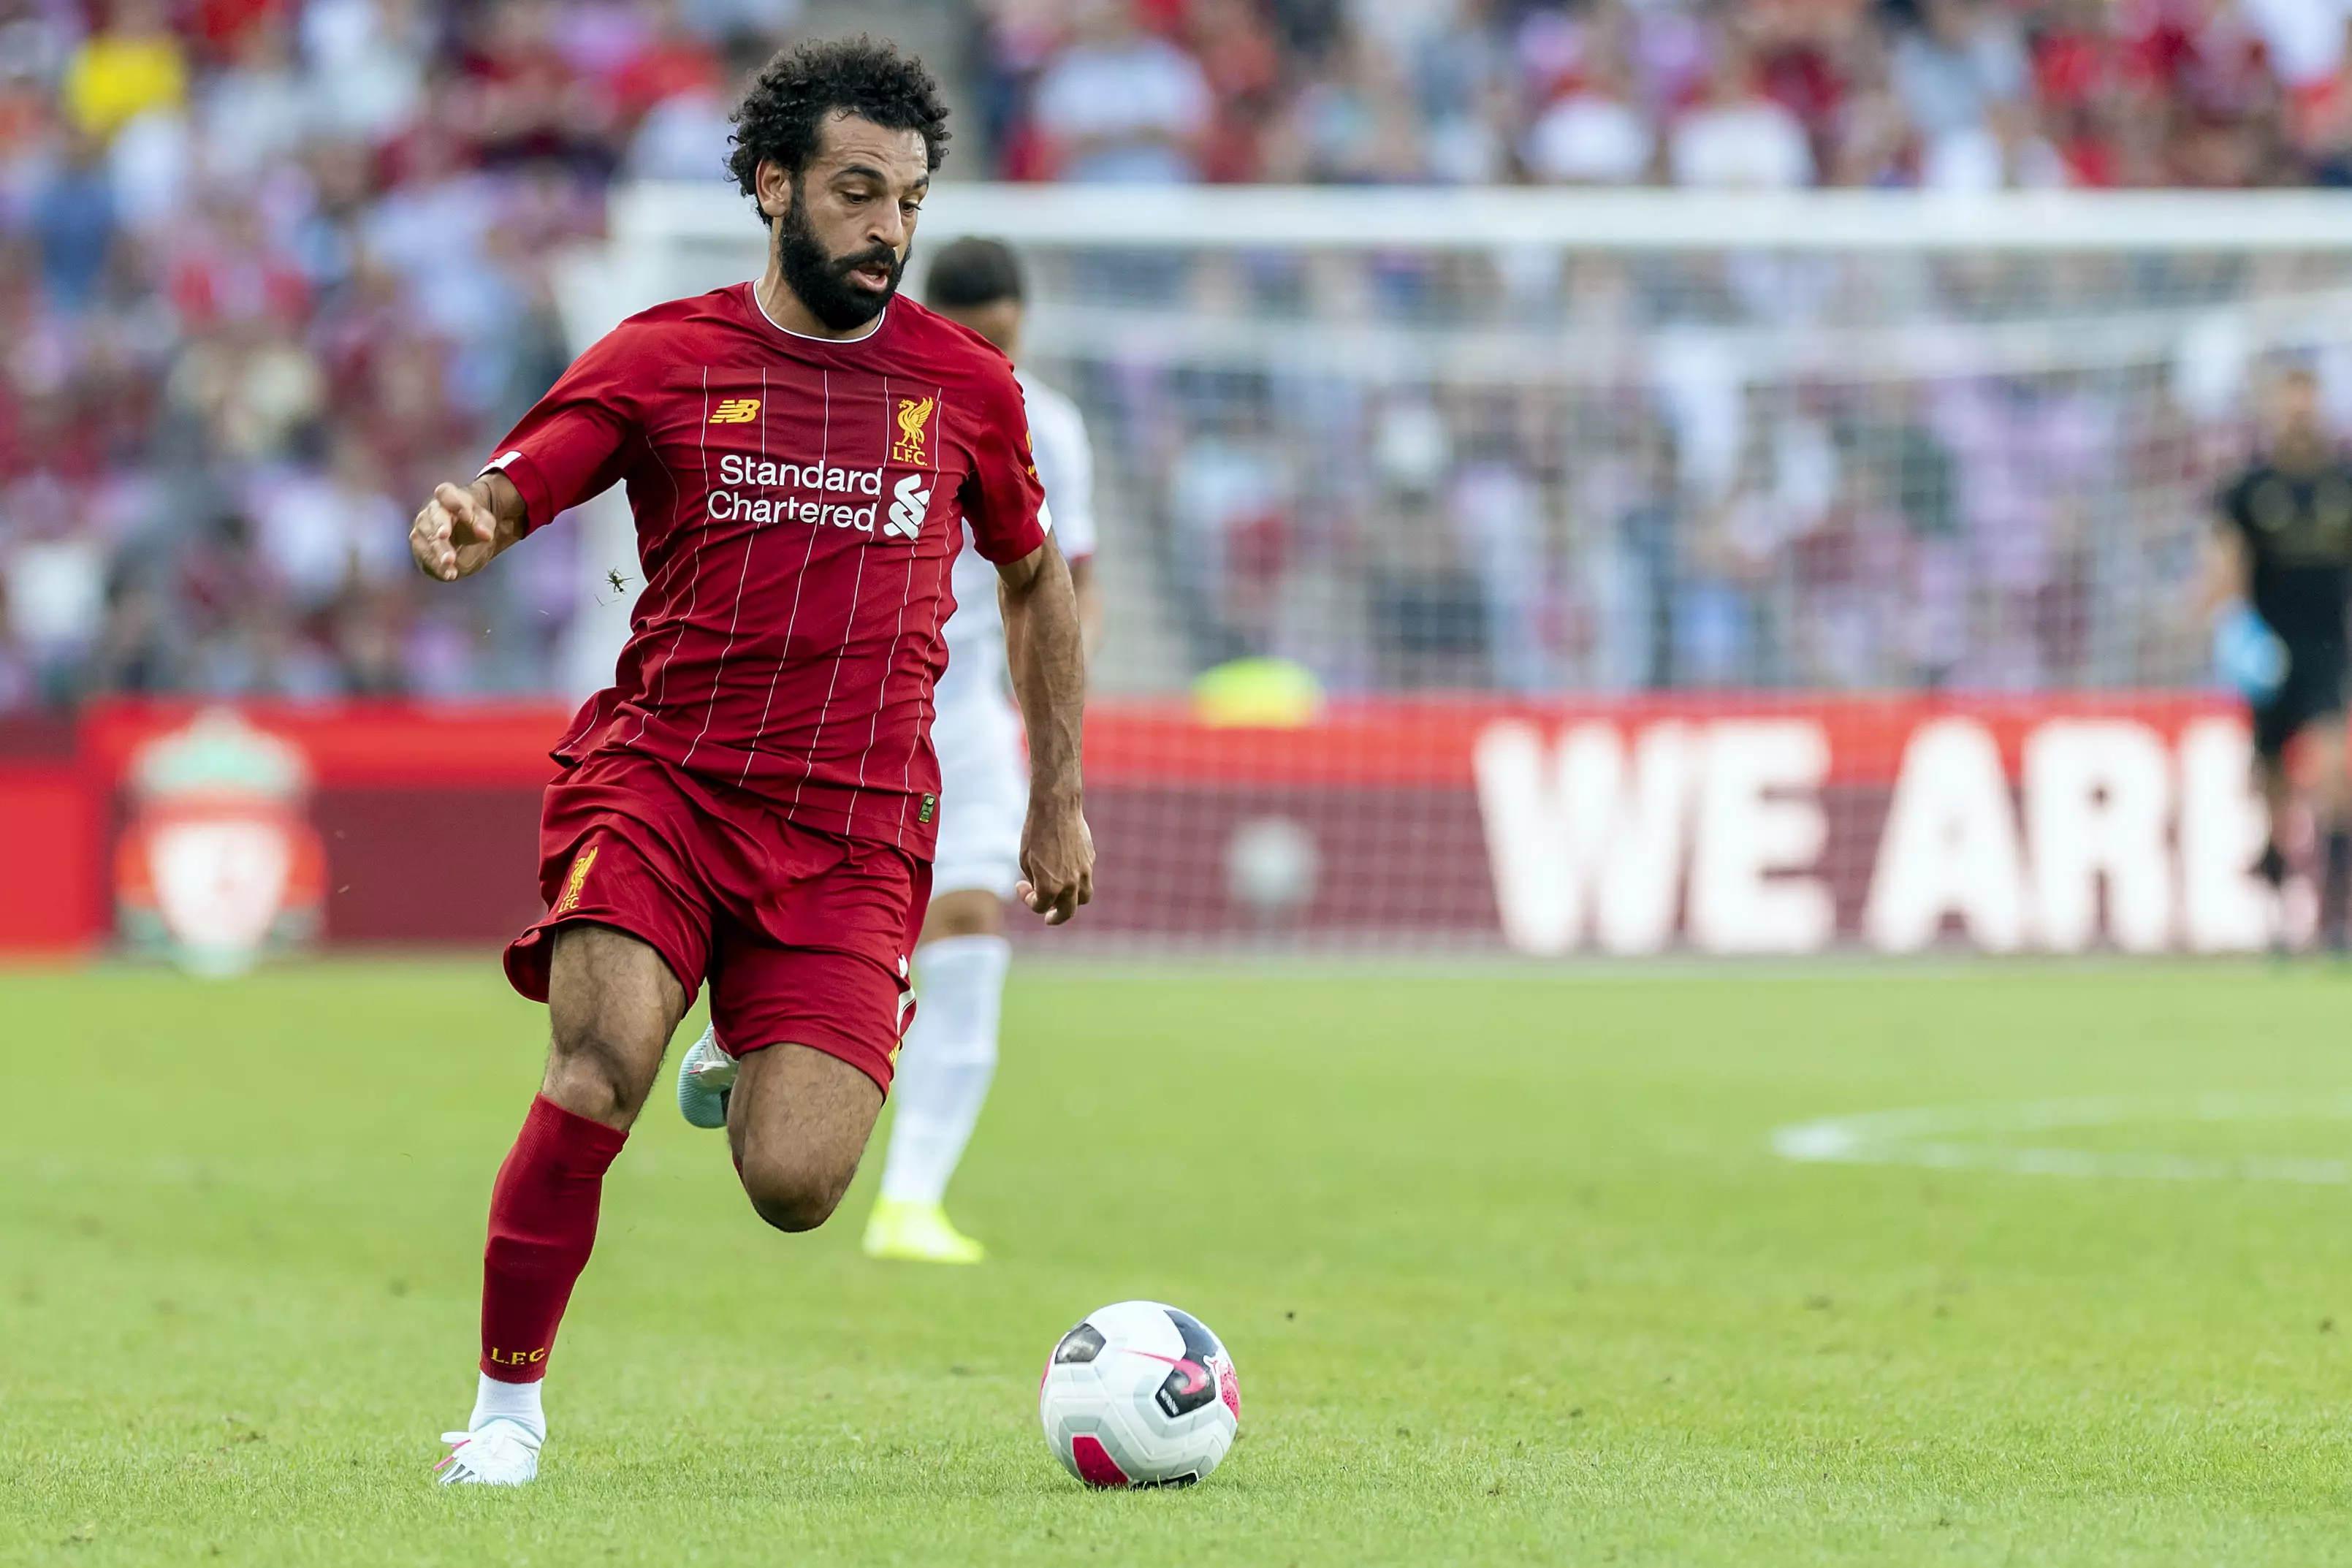 Mo Salah made it into our combined XI as part of a menacing front three